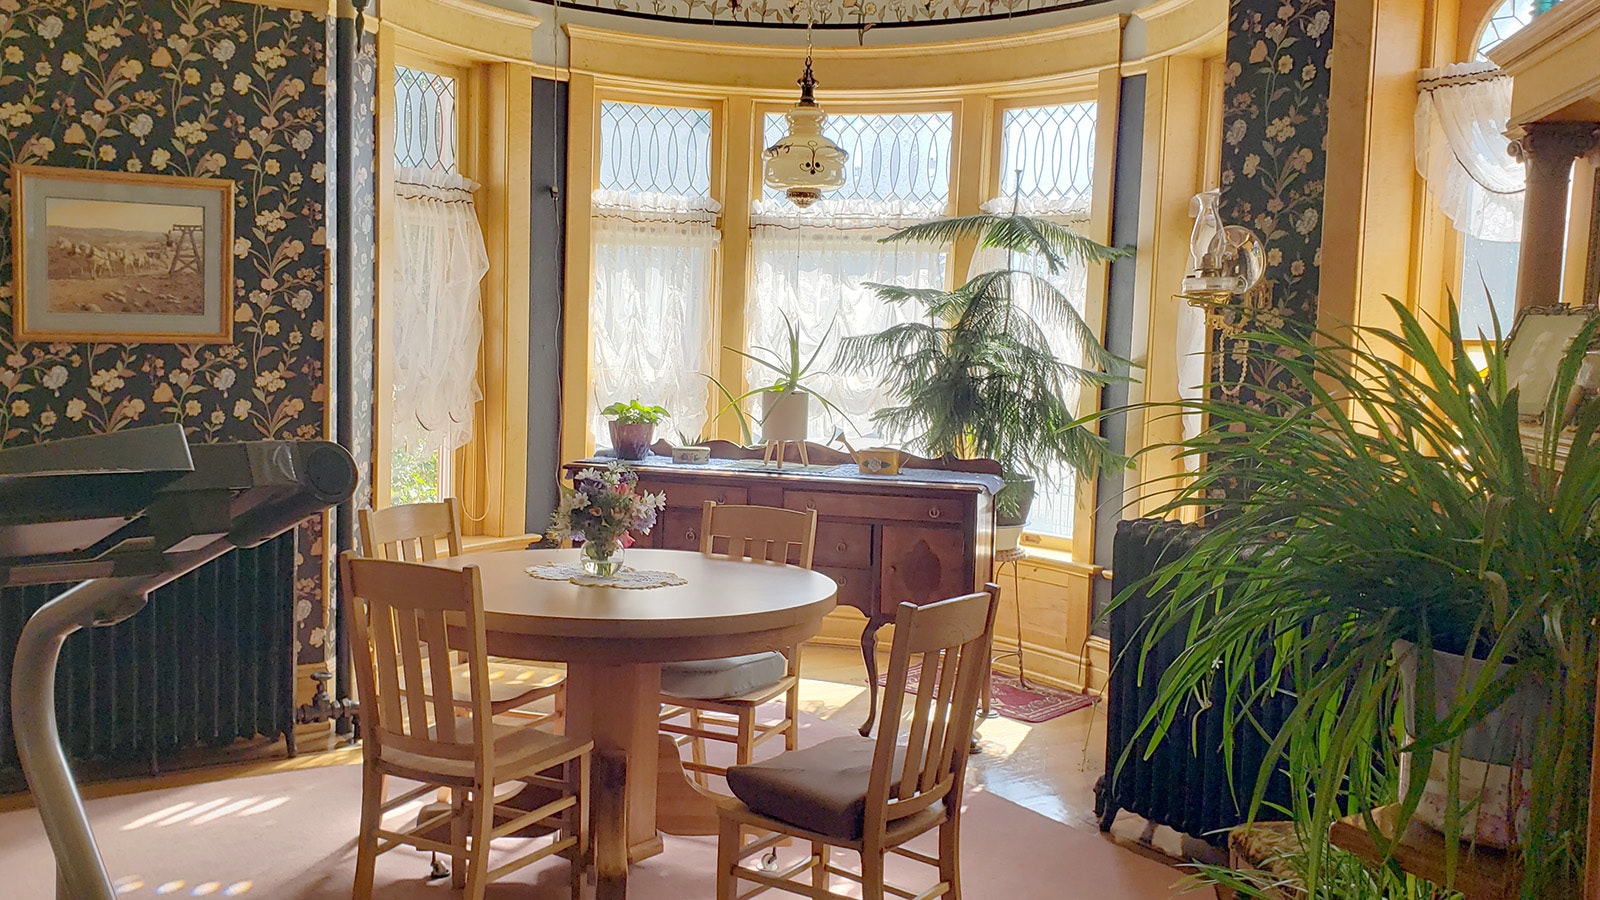 The dining room in the Ferris Mansion in Rawlins.